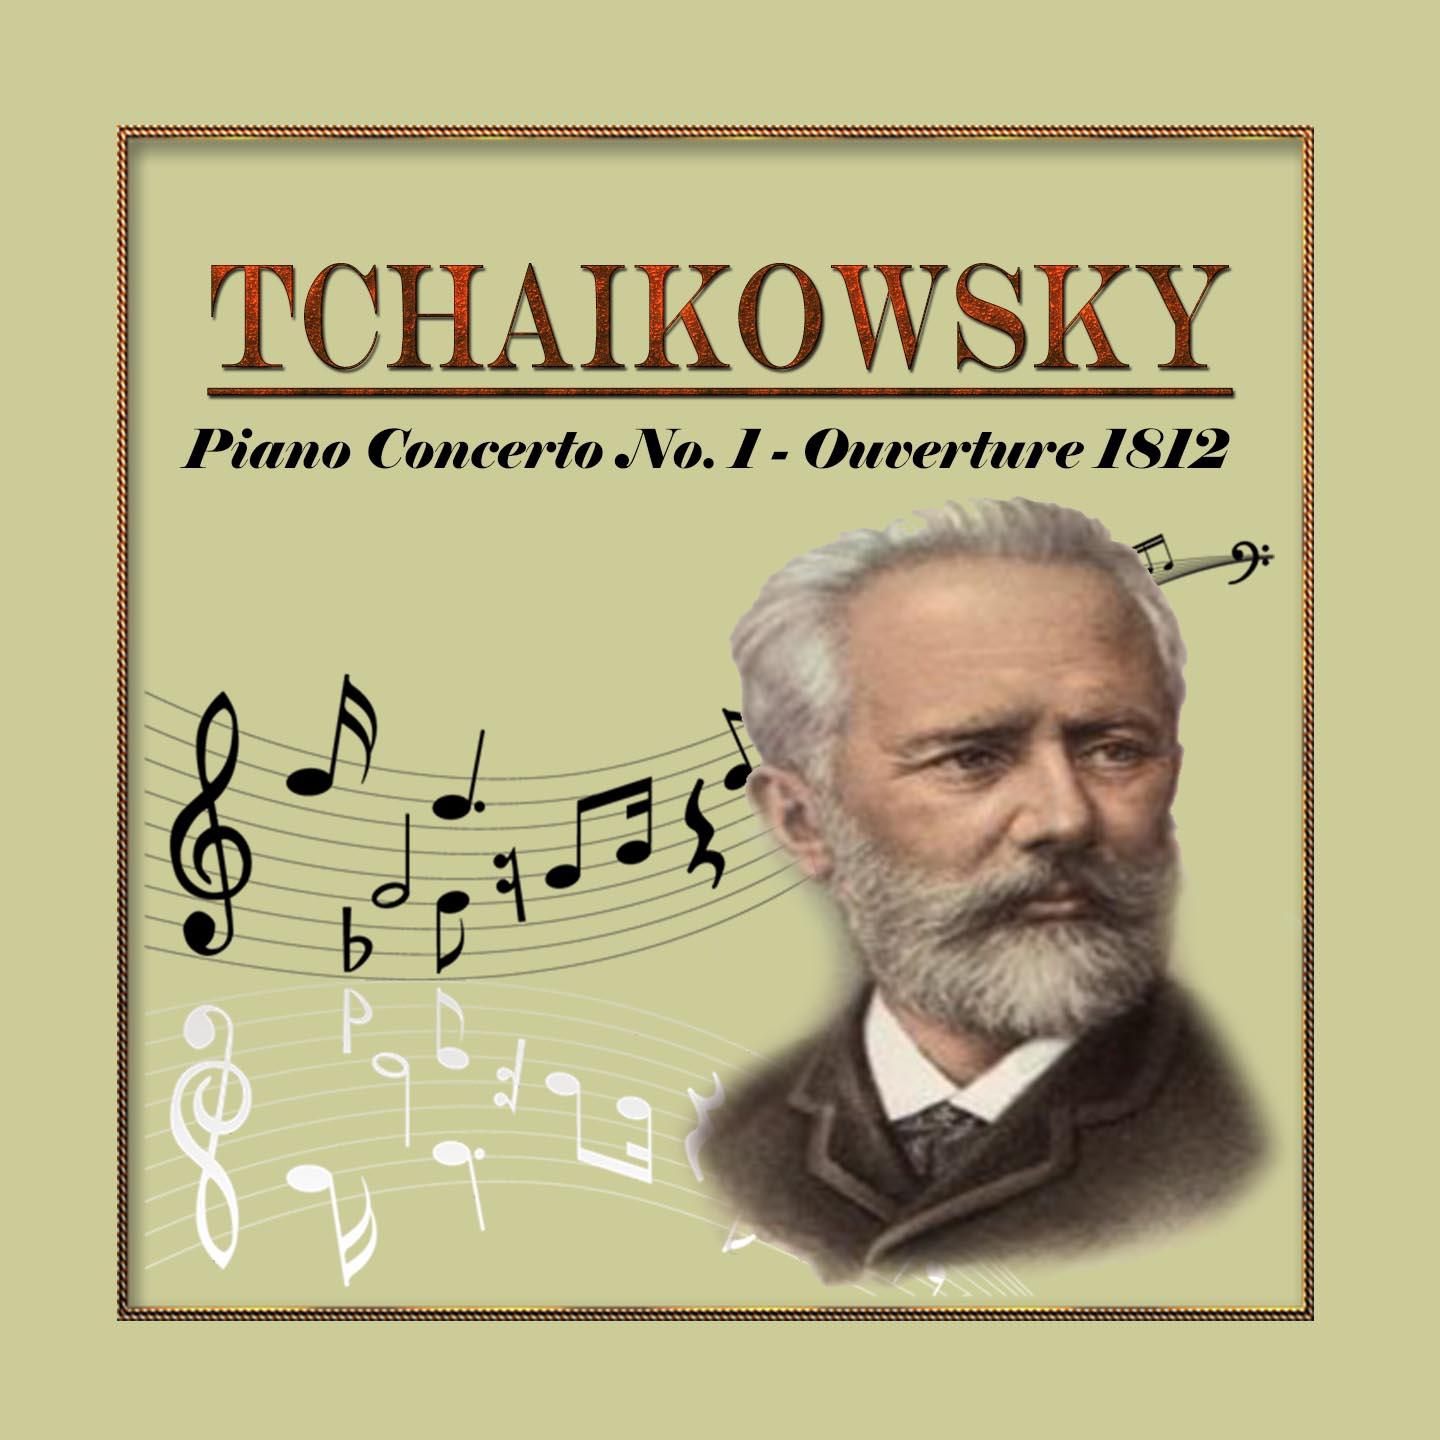 Tchaikowsky, Piano Concerto No. 1, Overture 1812